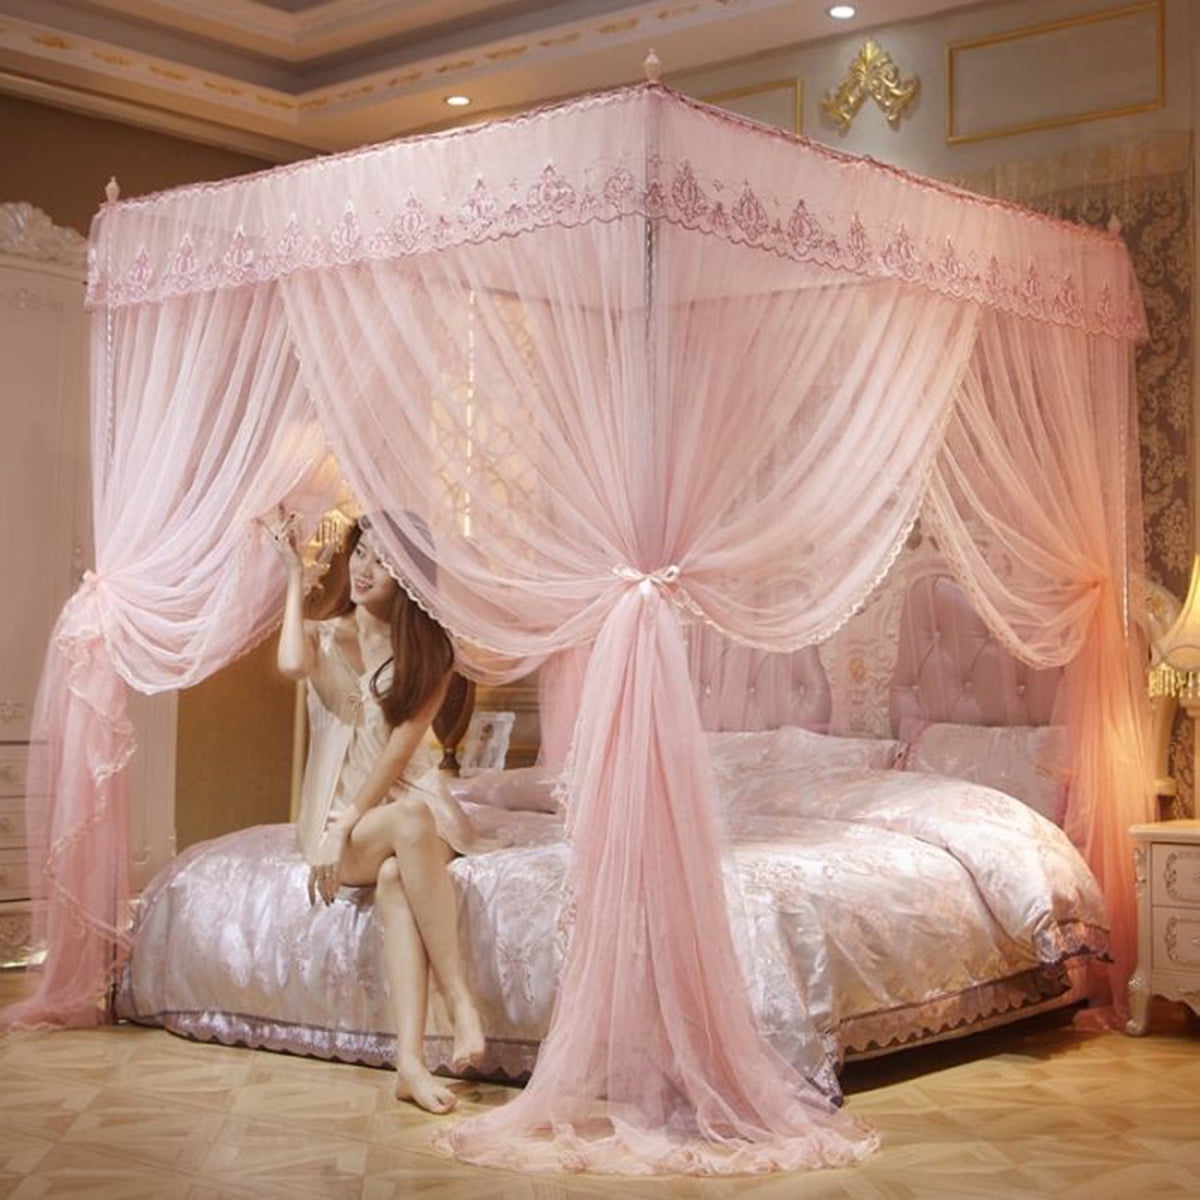 Four Corner Canopy Bed Curtains, Canopy Bed Covers King